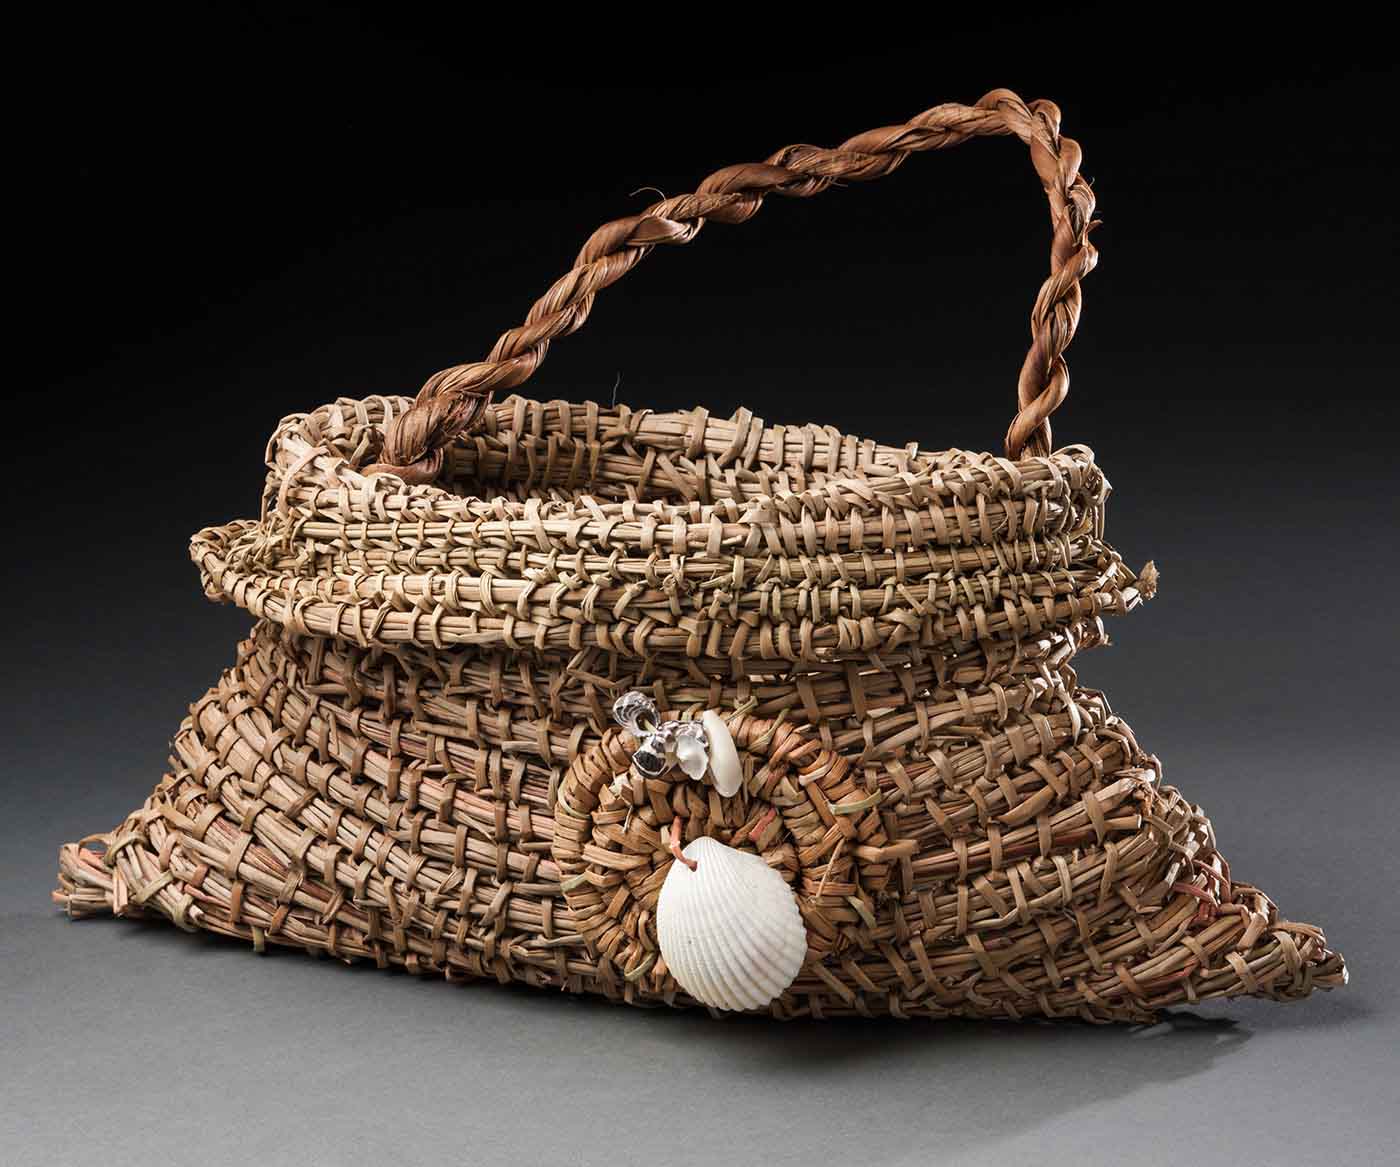 A woven bag with a short plaited handle. On the front side of the bag is a decorative coiled circle with five shells attached to it.